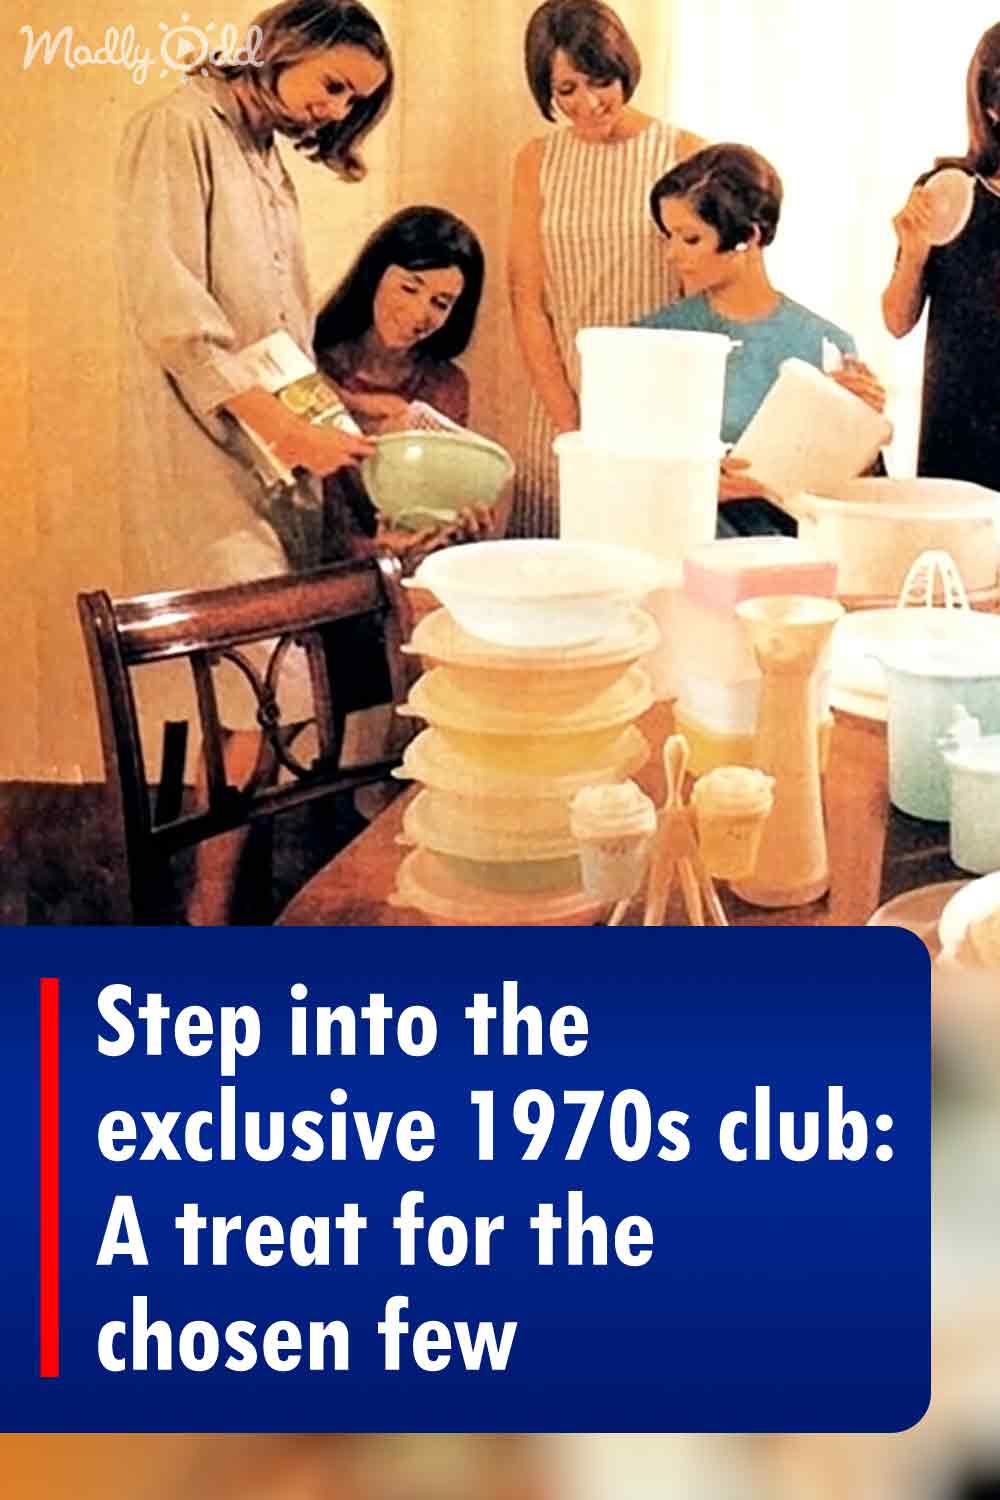 Step into the exclusive 1970s club: A treat for the chosen few